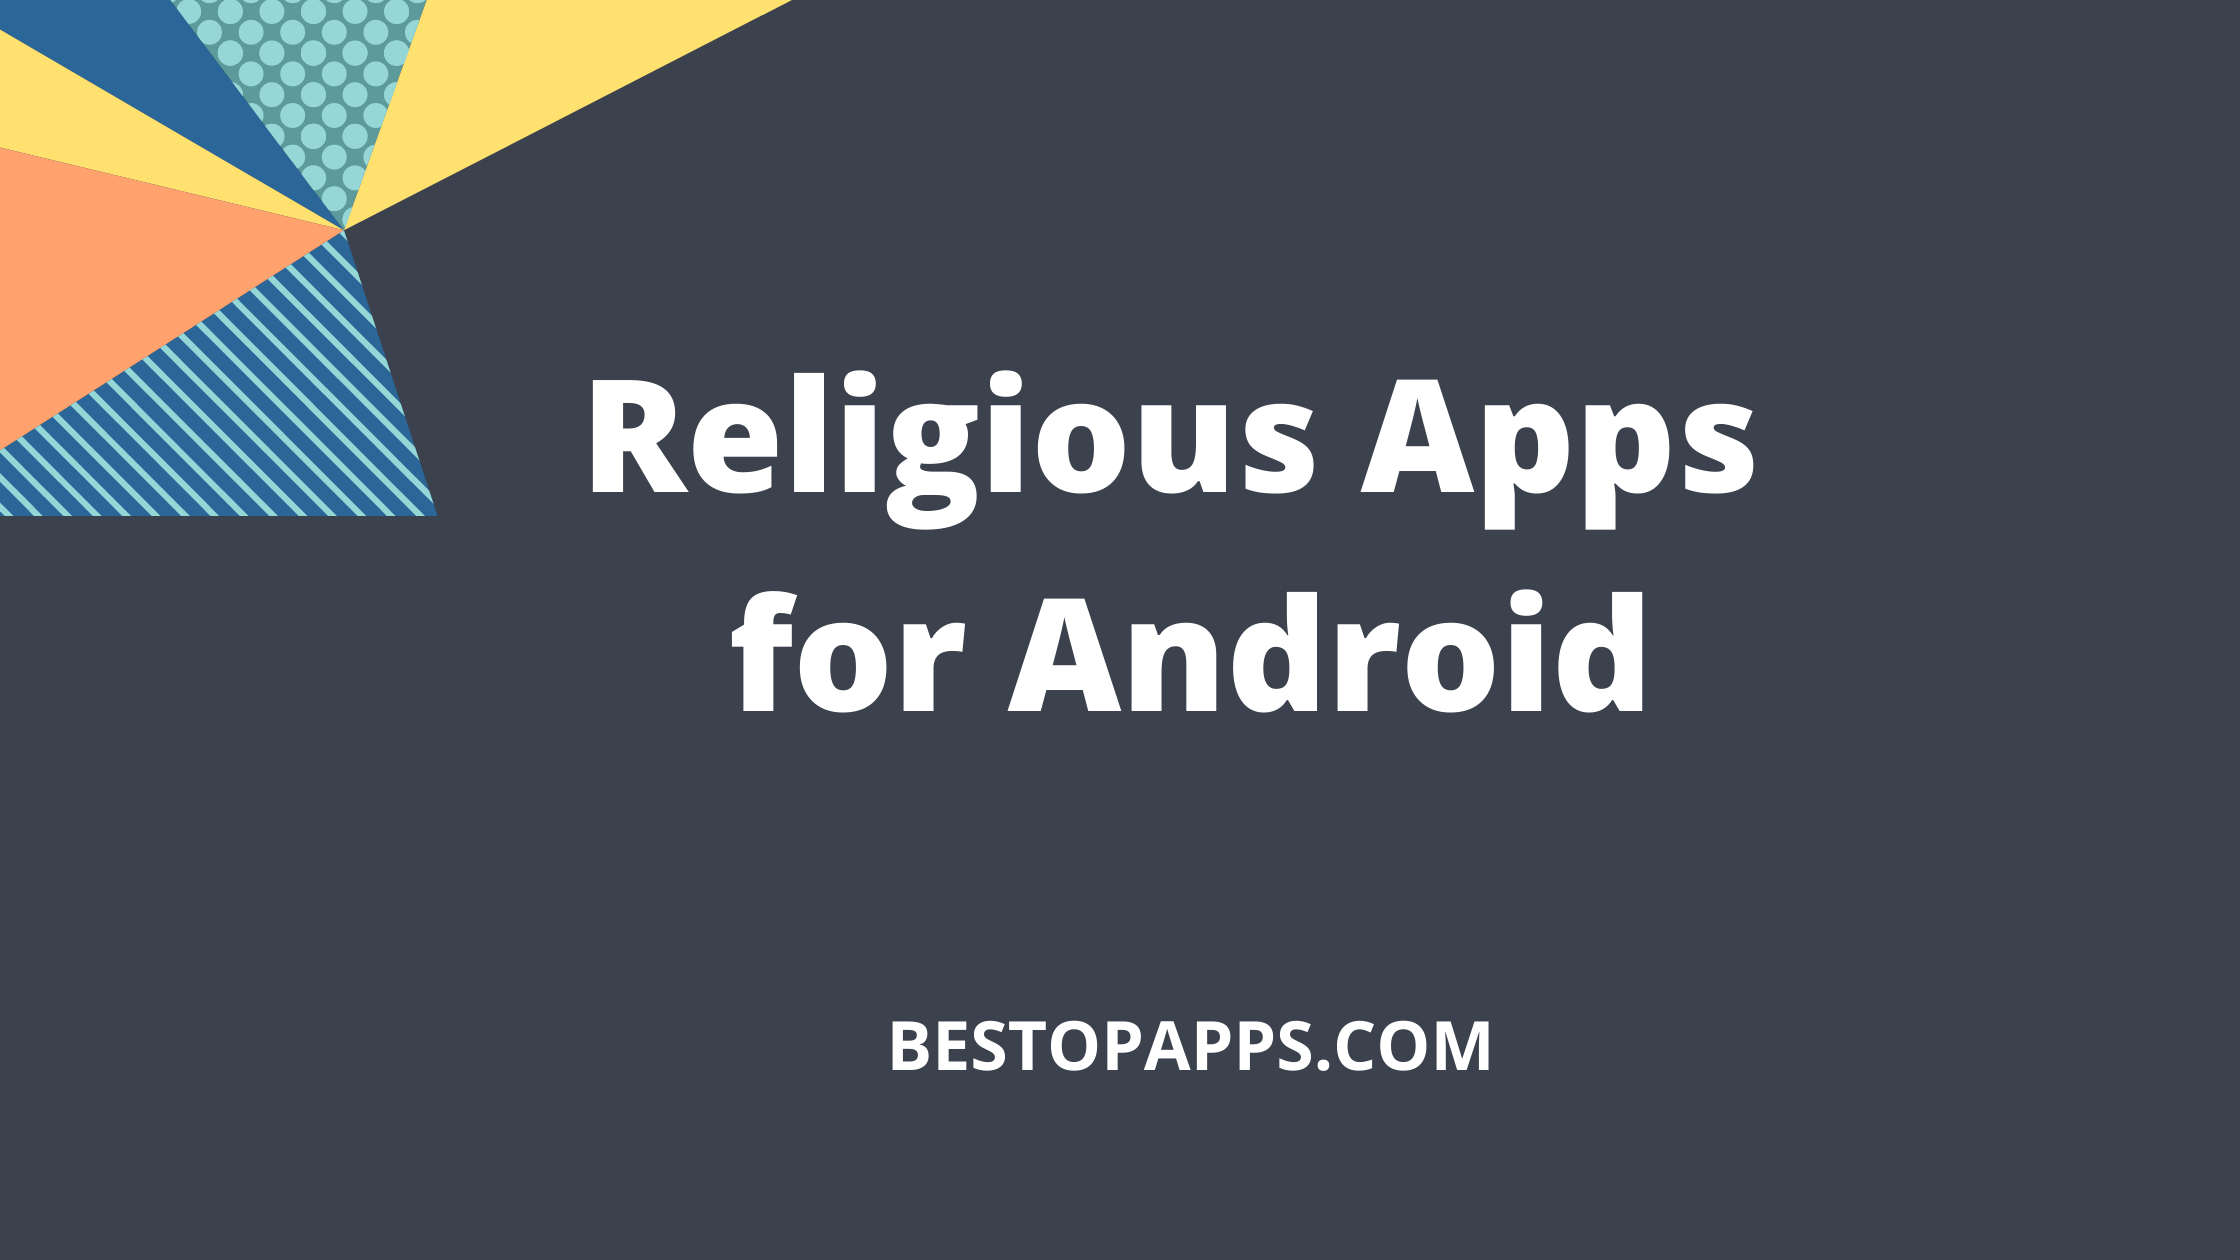 Religious Apps for Android